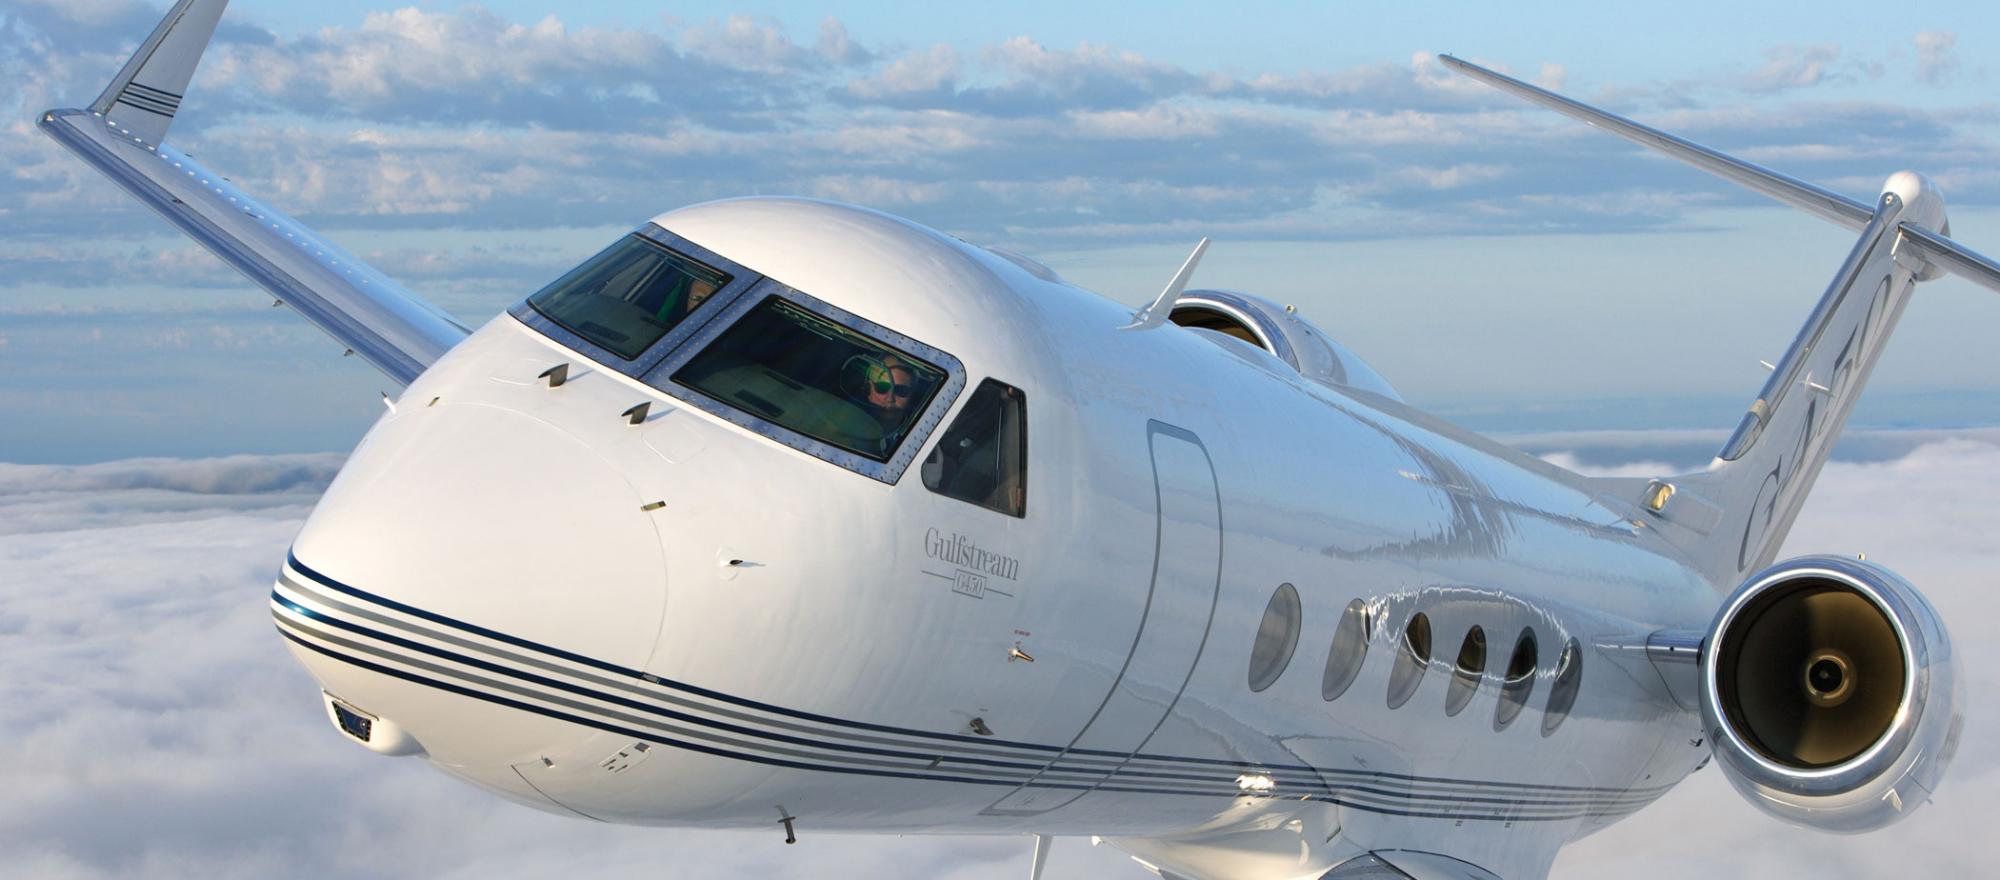 Owning and operating a Gulfstream G450 can cost $9,500 to $15,500 an hour or even more, depending on the depreciation method and the number of hours flown. Yet you can charter a fairly new one for about $5,600 an hour.